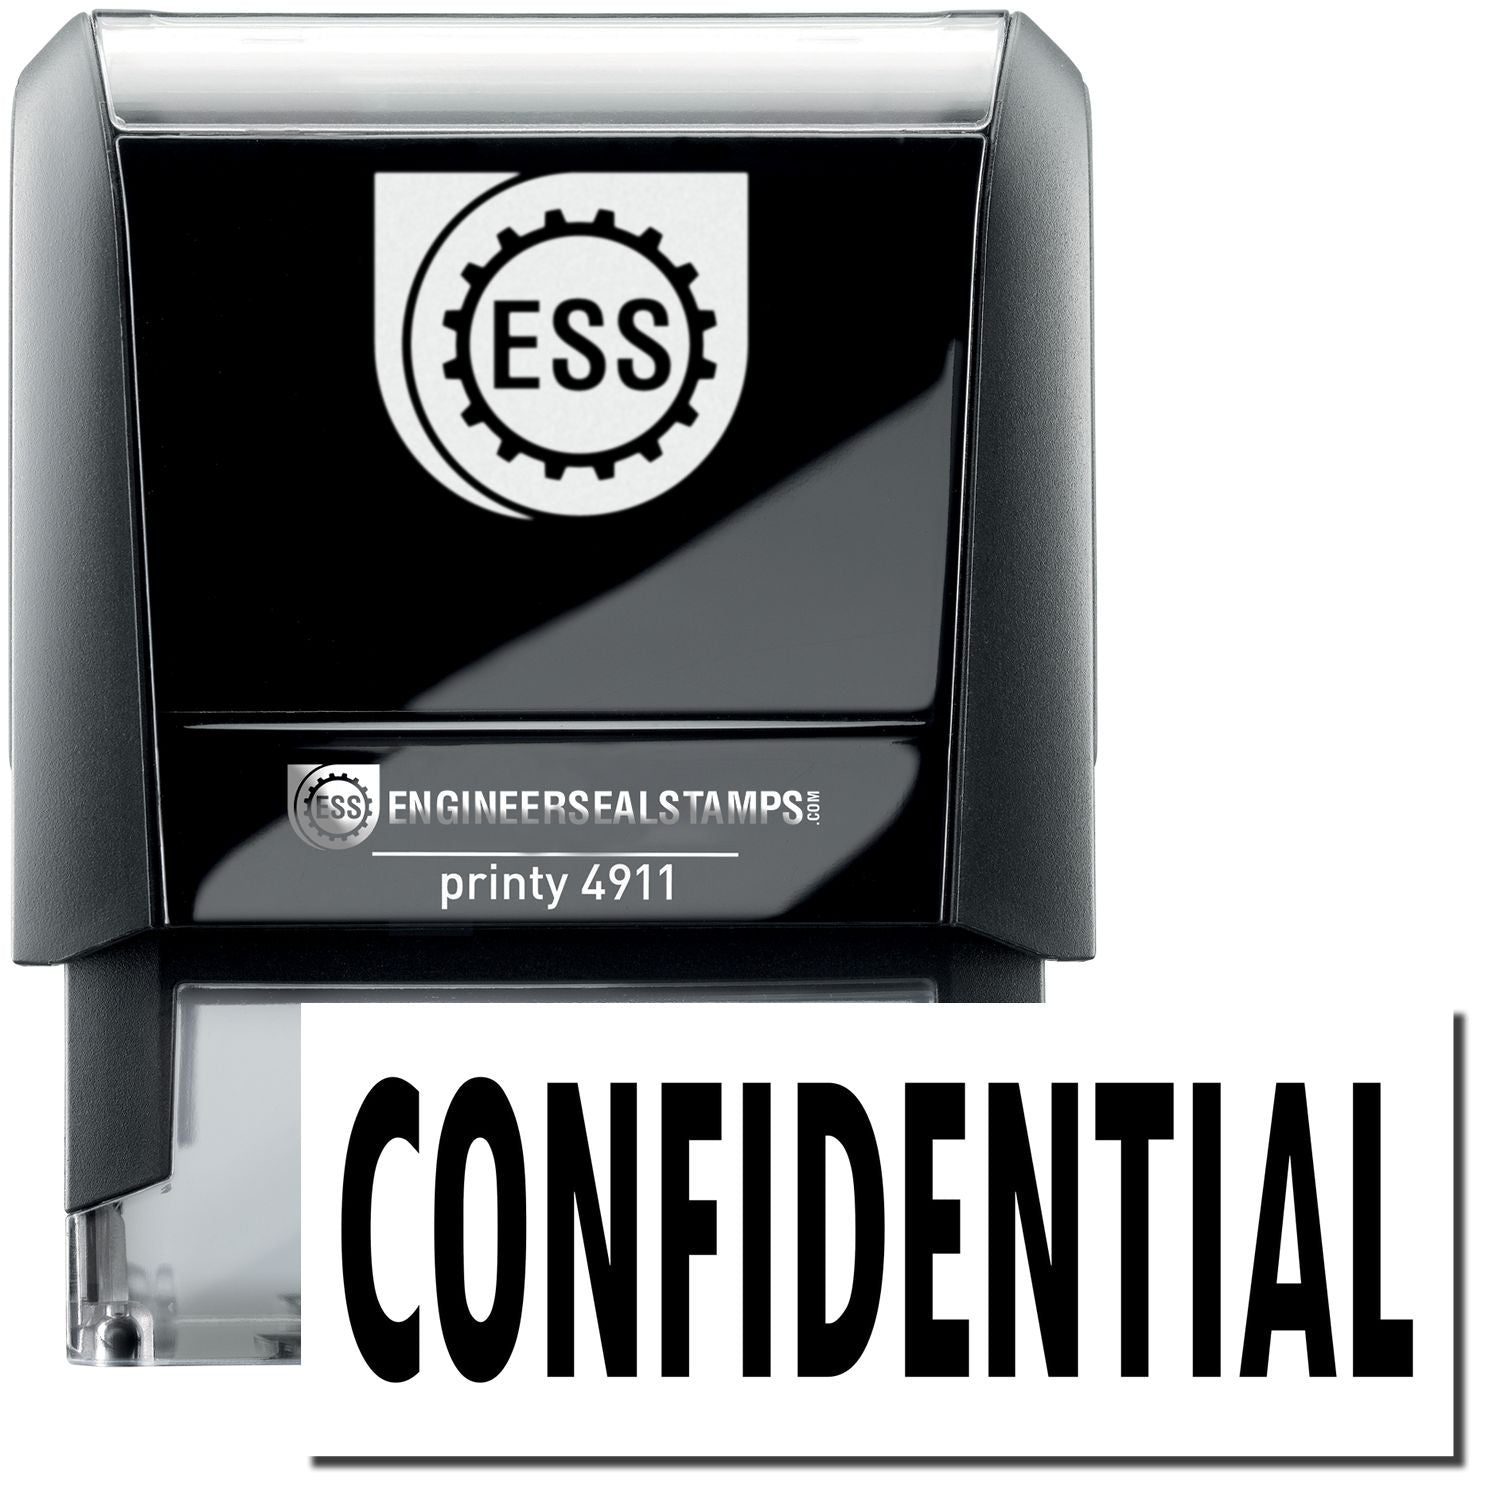 A self-inking stamp with a stamped image showing how the text "CONFIDENTIAL" is displayed after stamping.